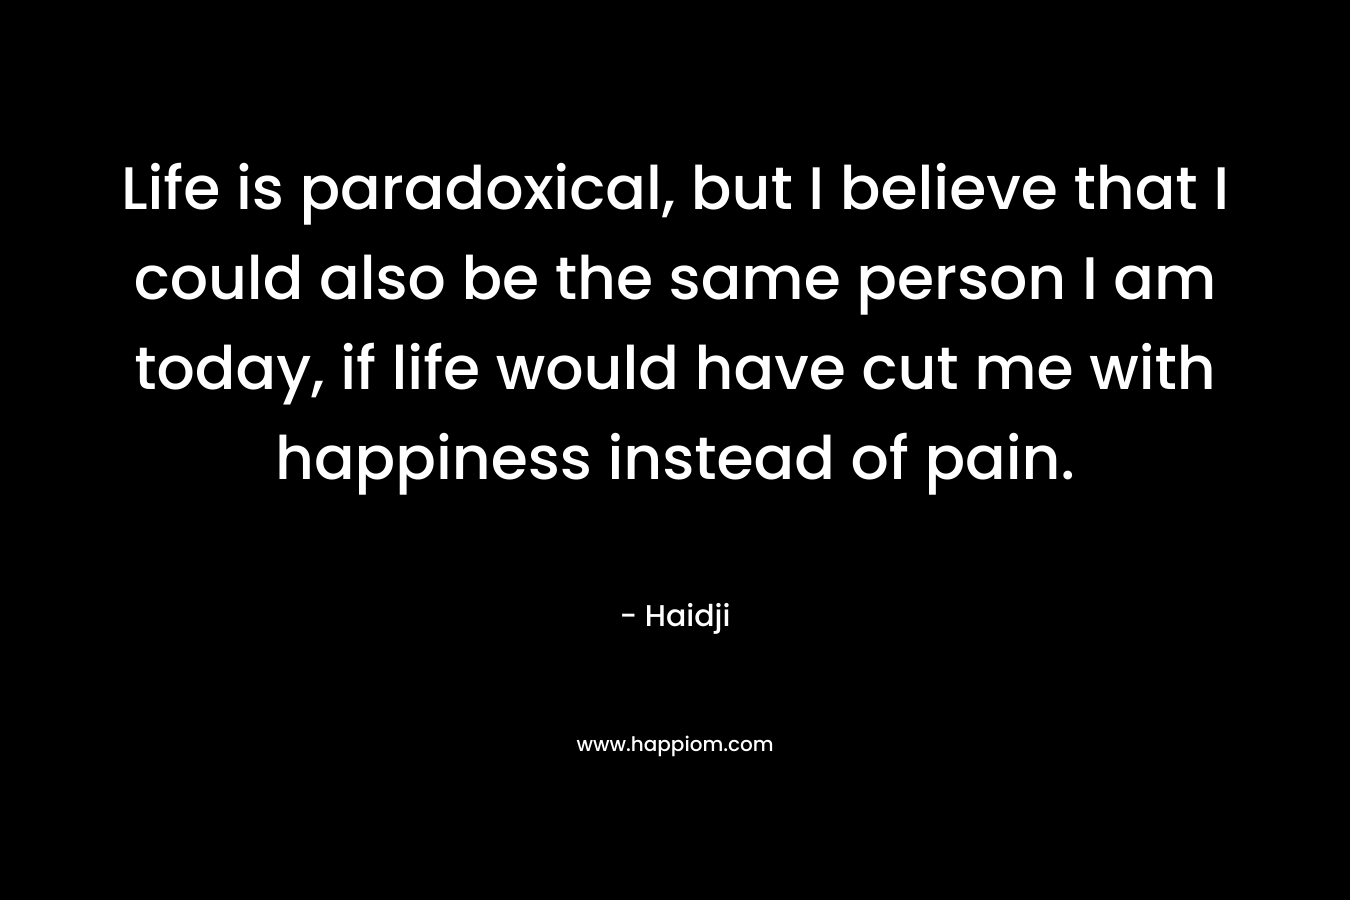 Life is paradoxical, but I believe that I could also be the same person I am today, if life would have cut me with happiness instead of pain.